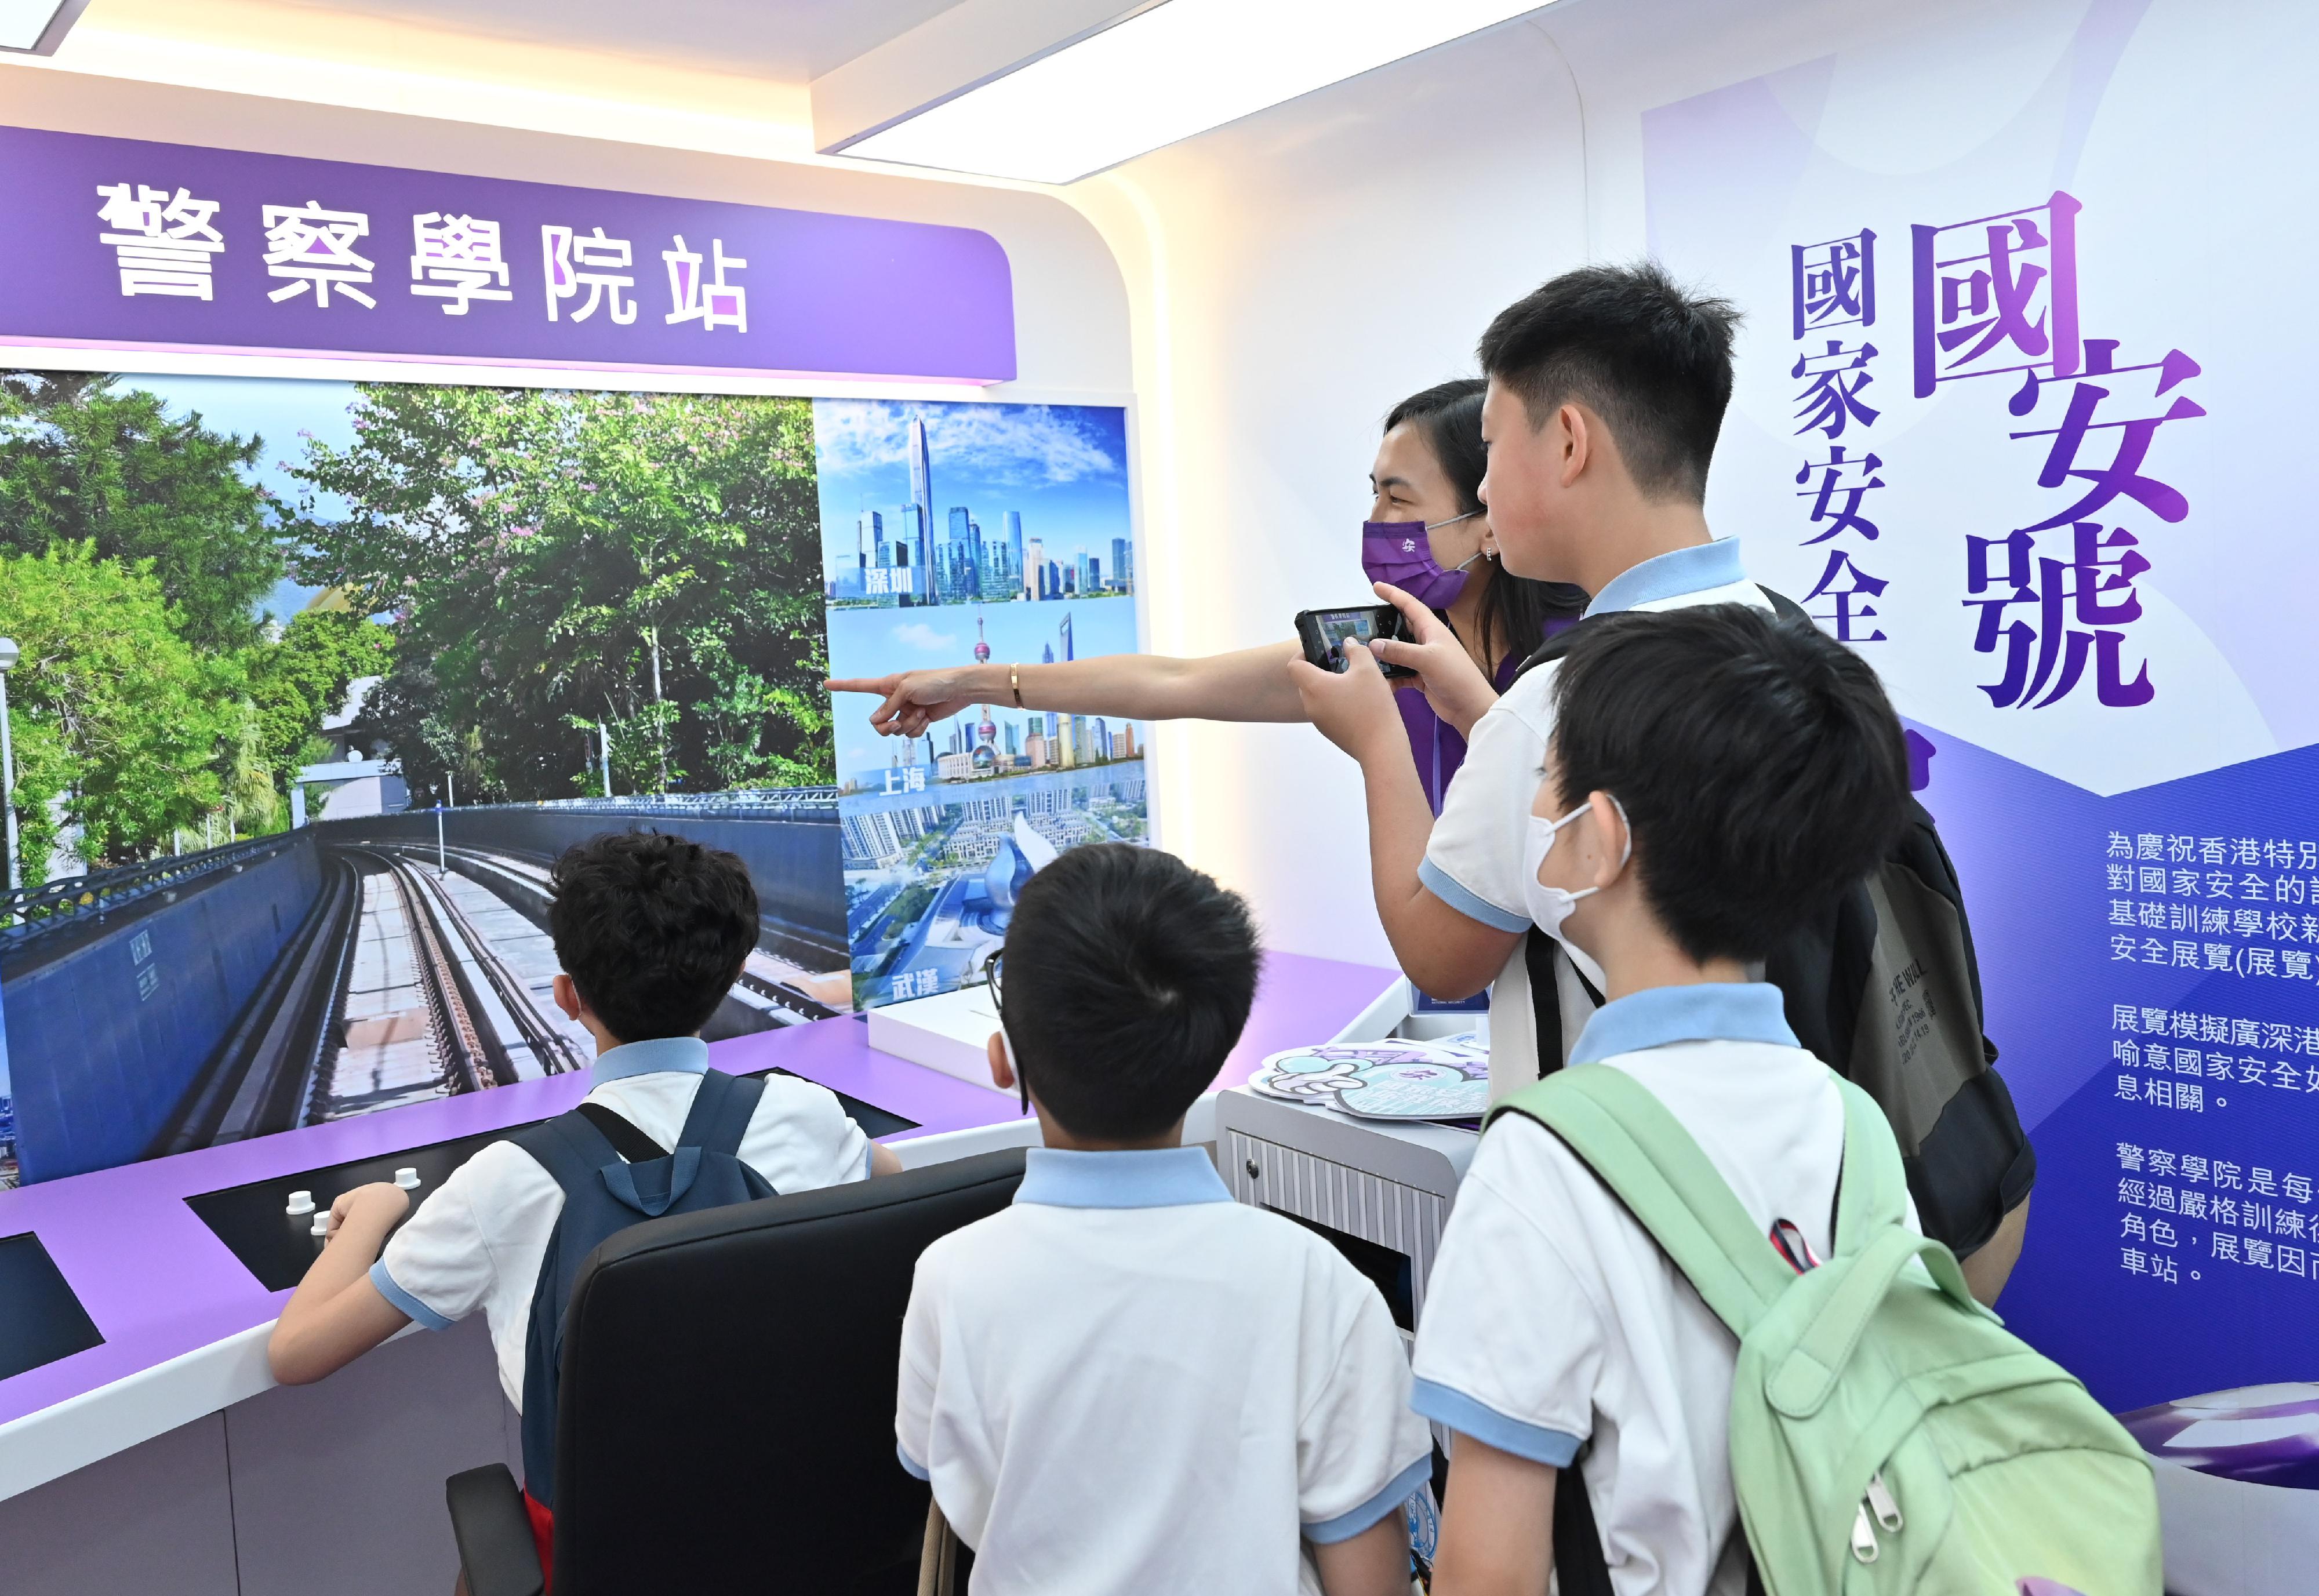 The Police Force held an open day in support of the National Security Education Day at Hong Kong Police College today (April 15). Photos shows a group of students participating in an interactive game at the “NS Express National Security Exhibition”, with a view to enhancing their understanding of national security.
